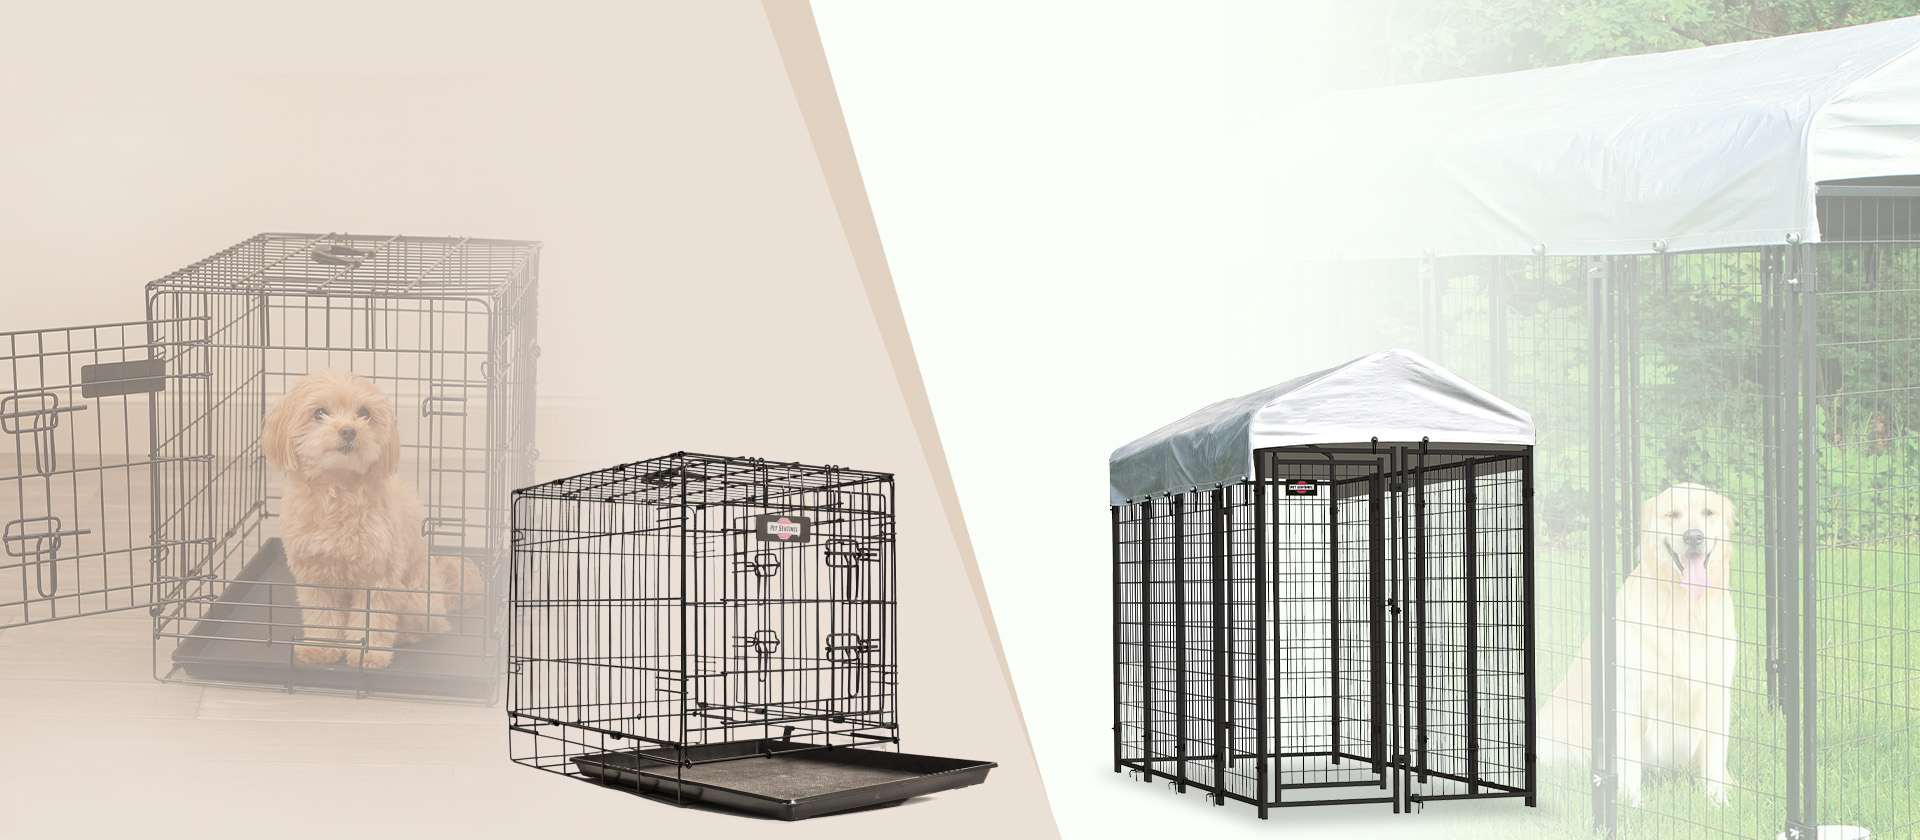 Pets Cage